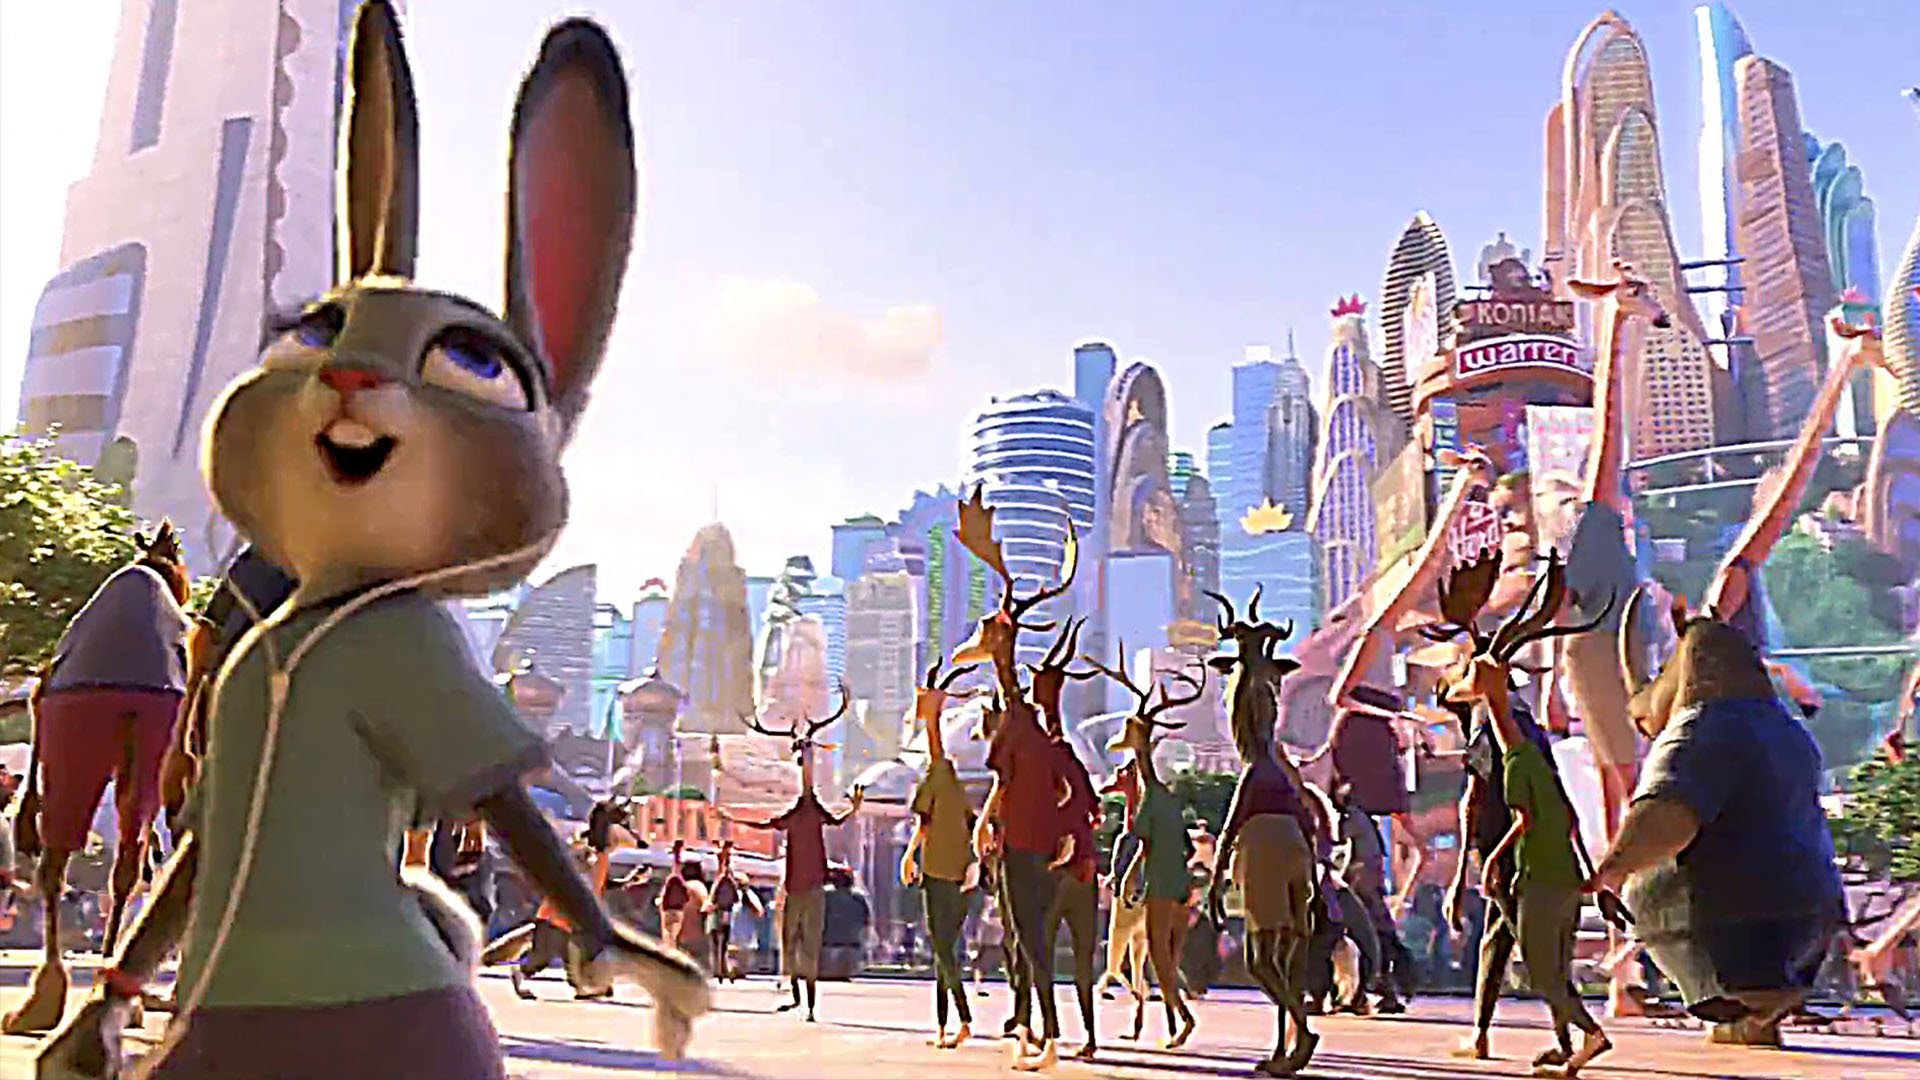 1920x1080 0 Zootopia trip wallpaper furry Zootopia wallpaper HD background download  Facebook Covers iPhone.